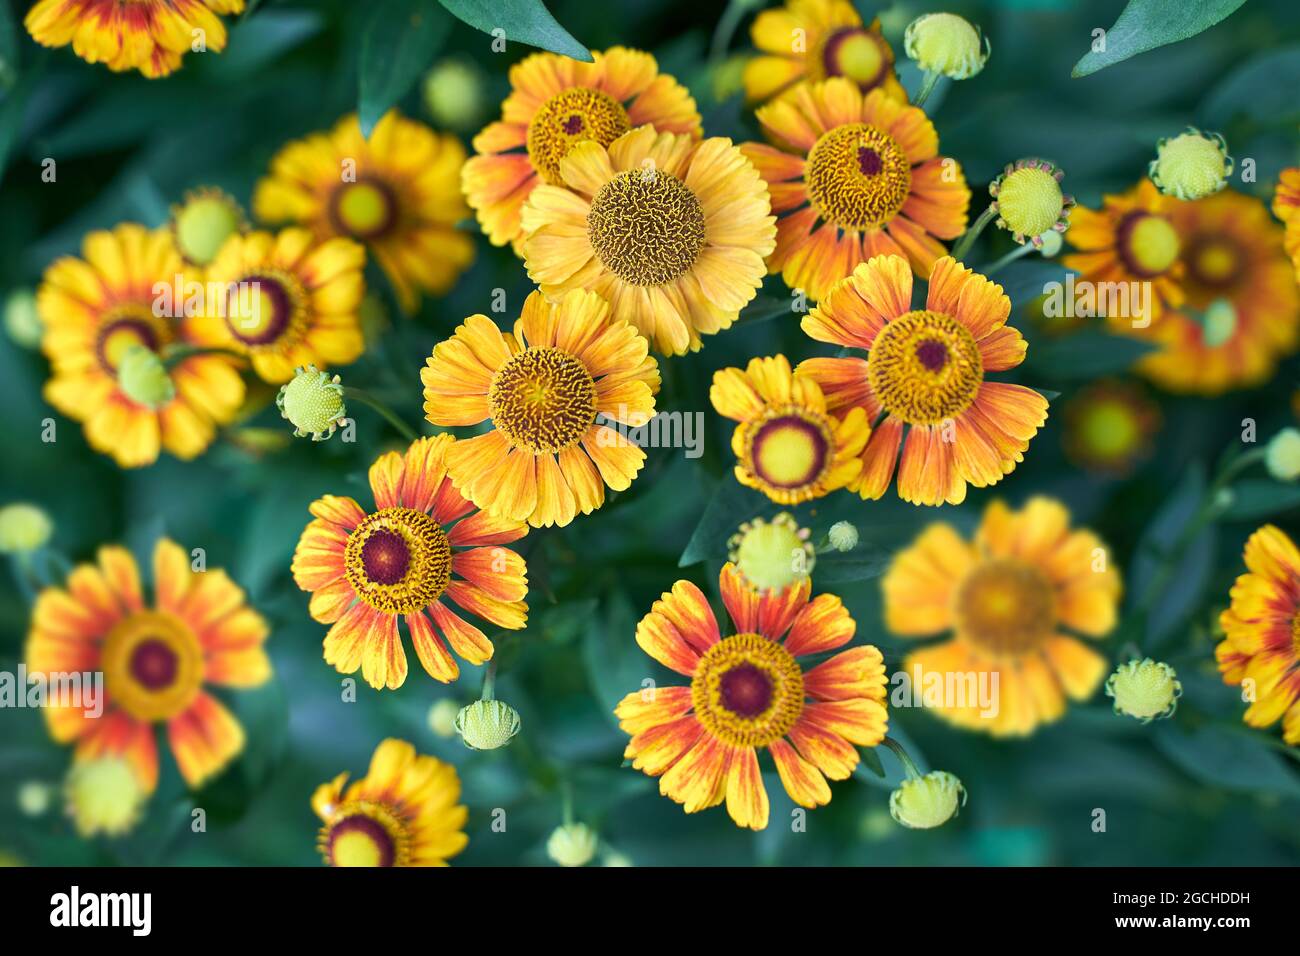 gaillardia flower red and yellow close up on green blurry background  Stock Photo